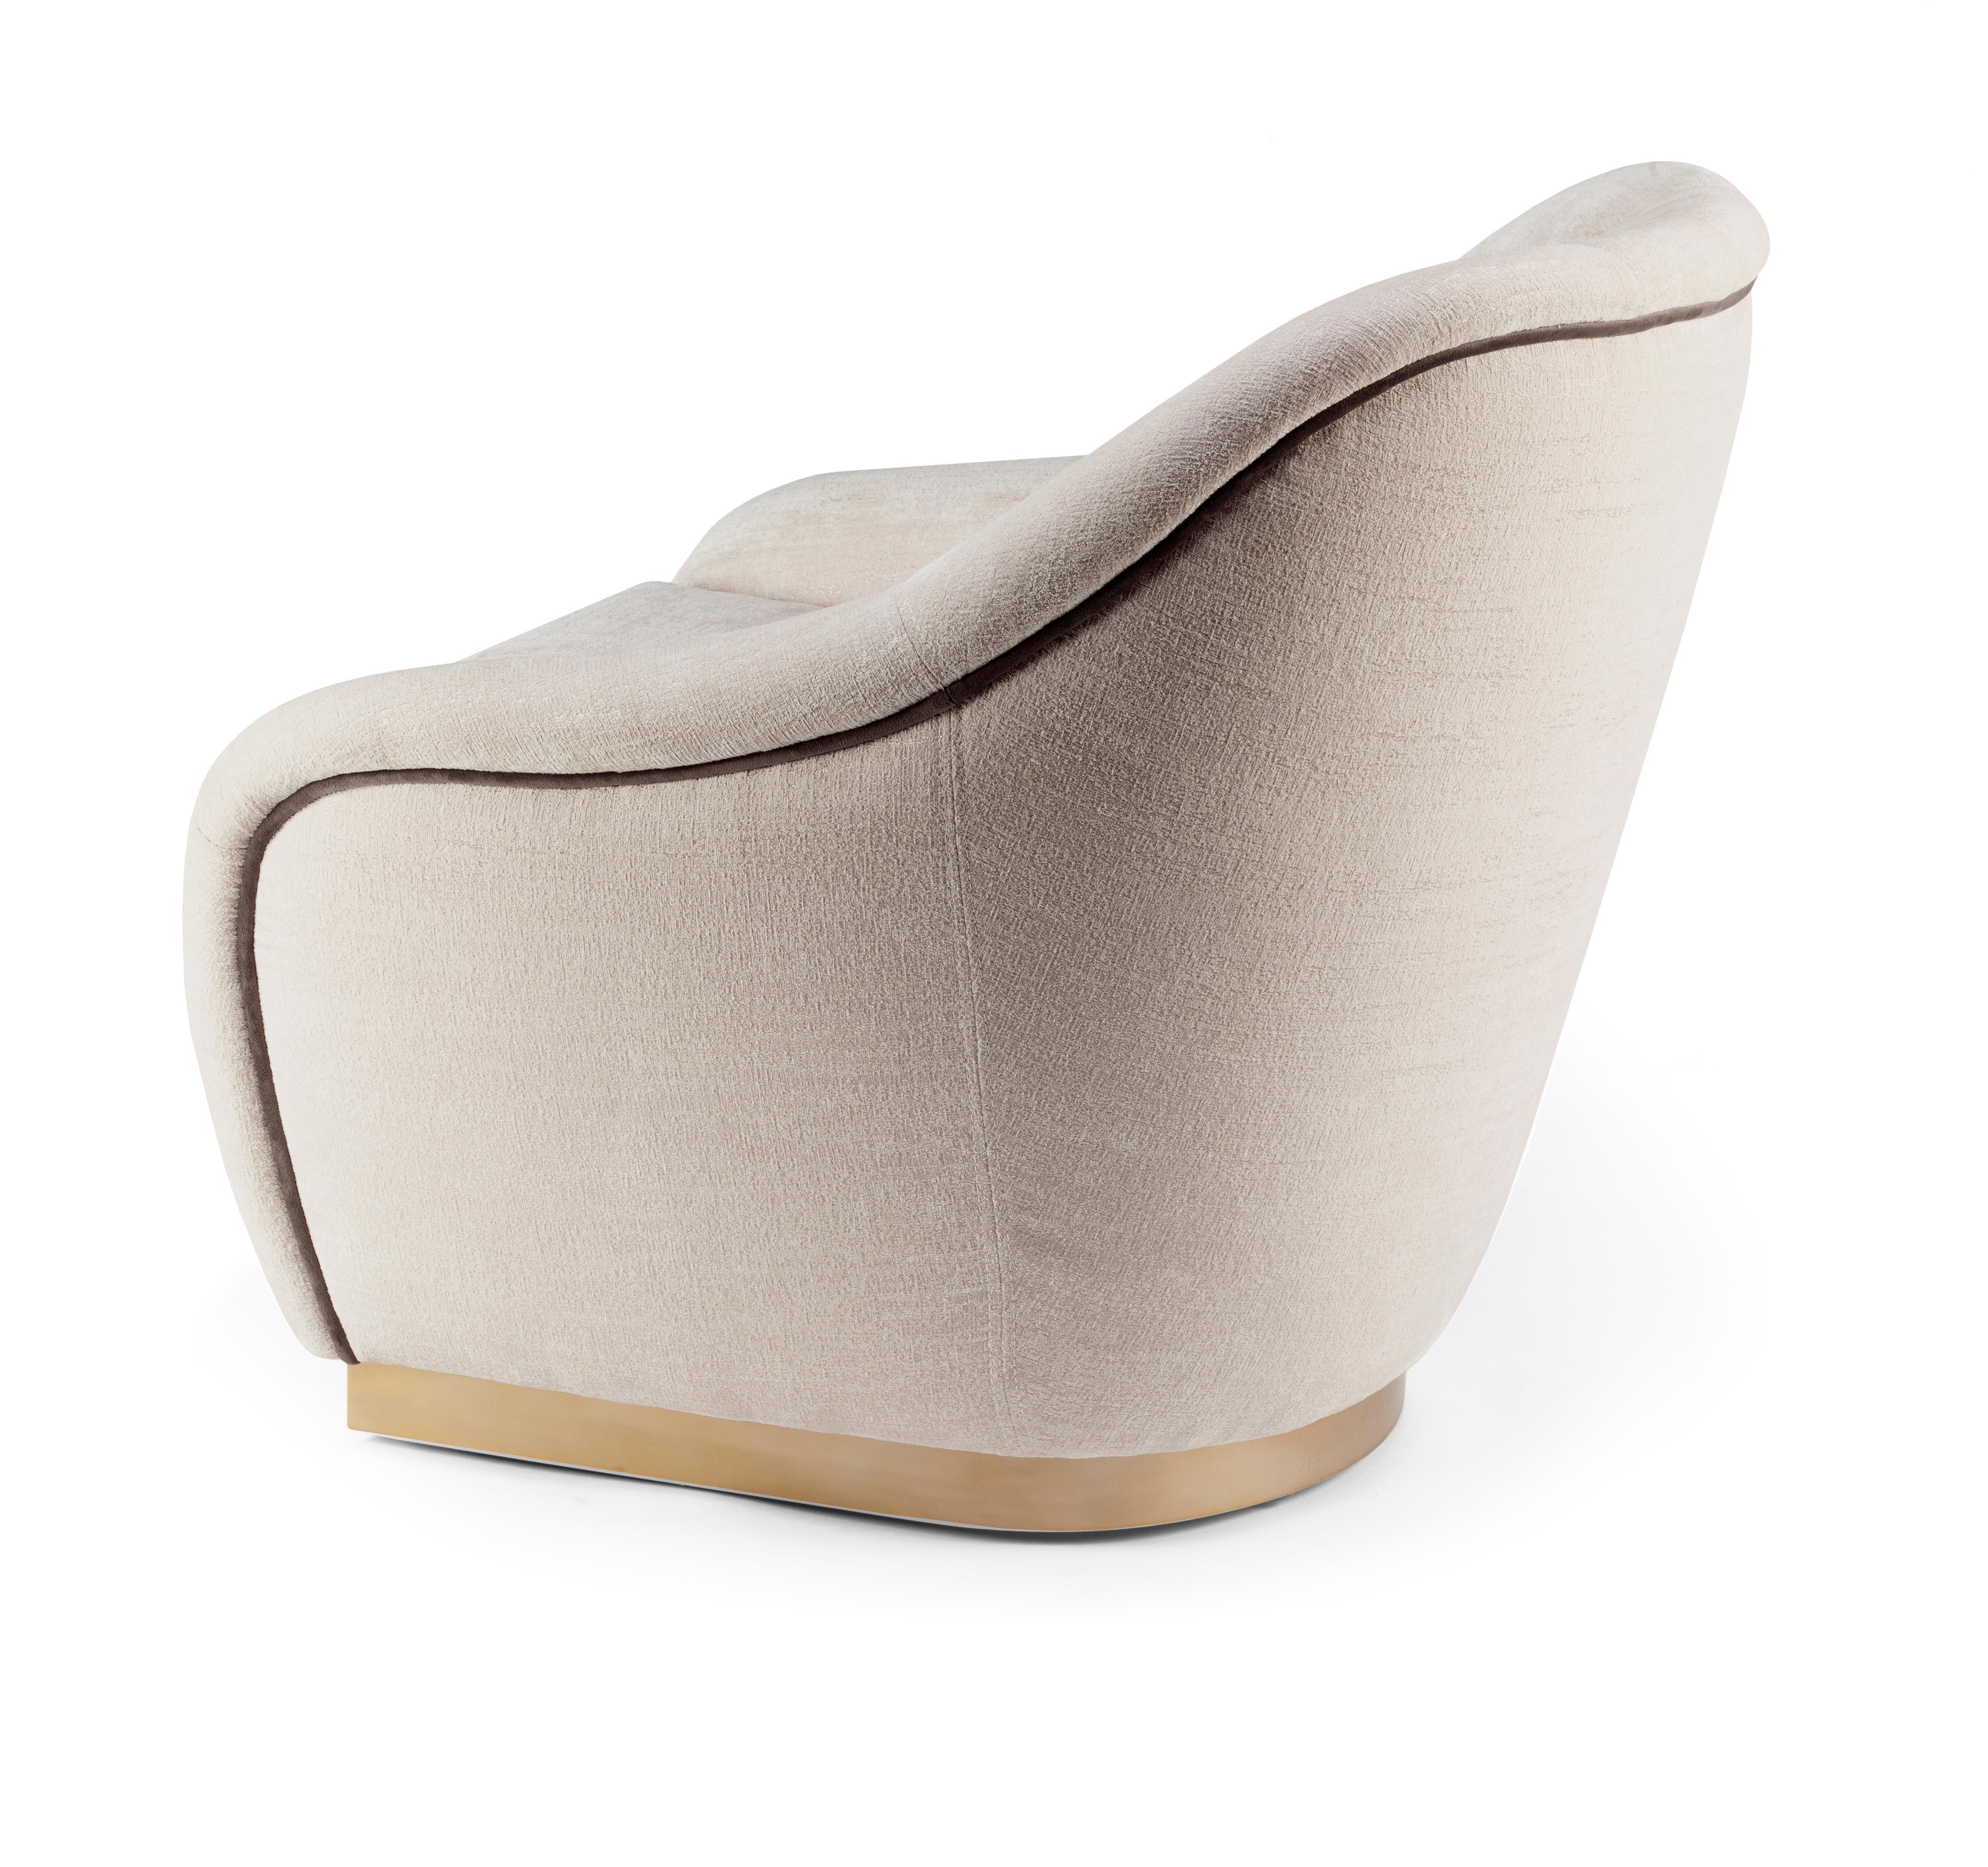 Round, smooth lines, with a combination of smooth and sculpted fabric, with its upholstered back texture carefully sewed and brass base, Gia’s delicate balance is unmistakable. A spirit of class and tranquility emanates from this comfortable